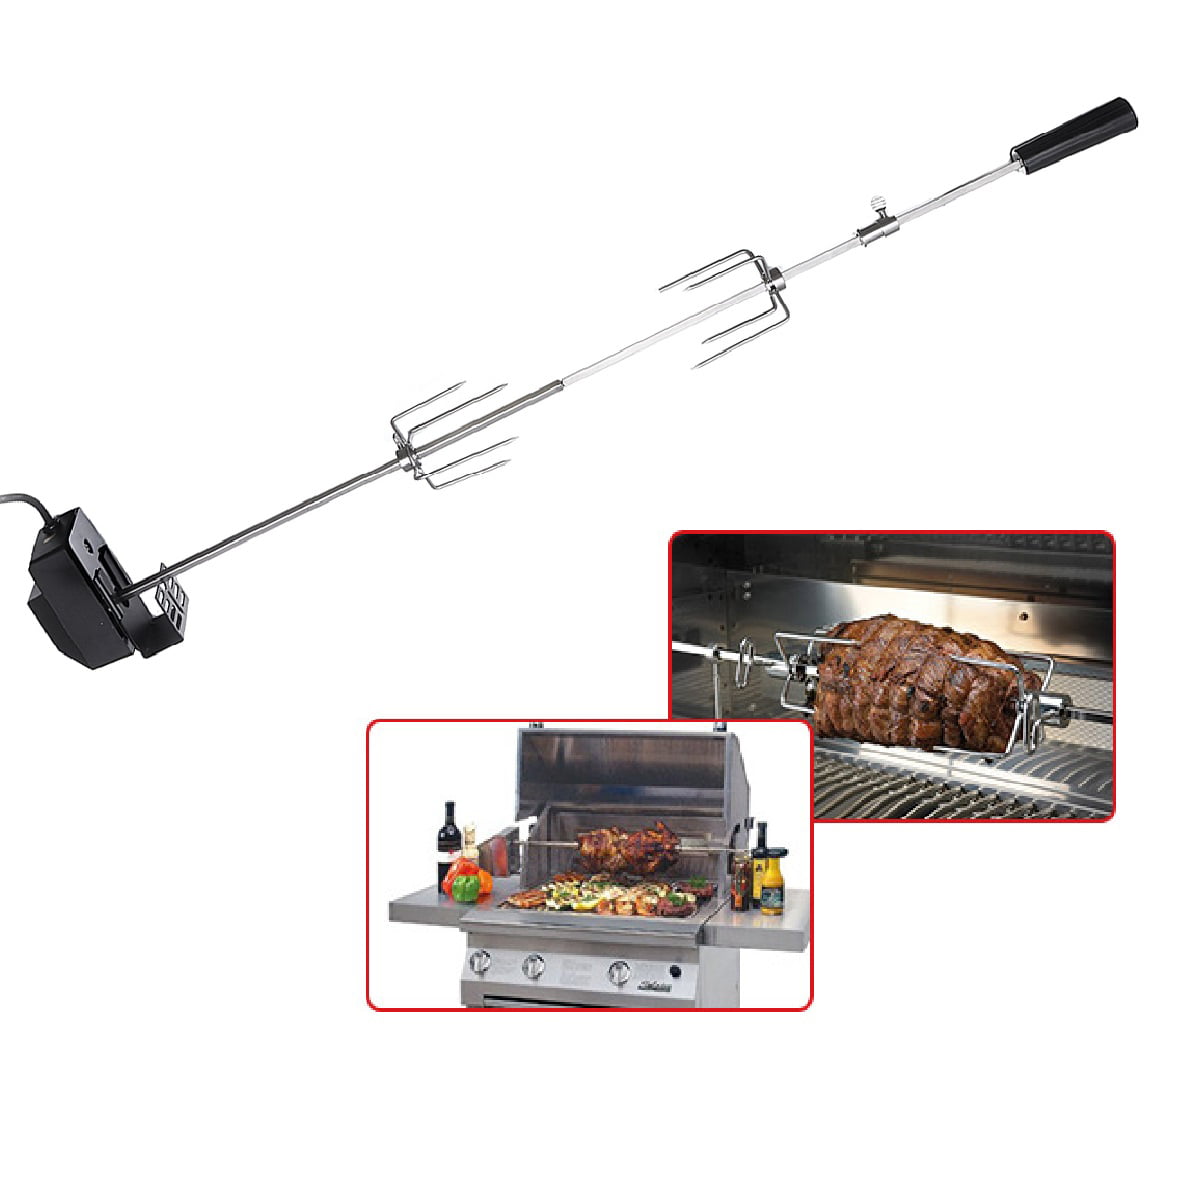 Universal Electric Grill Rotisserie Kit Outdoor Spit Roaster Rod Stainless Steel 